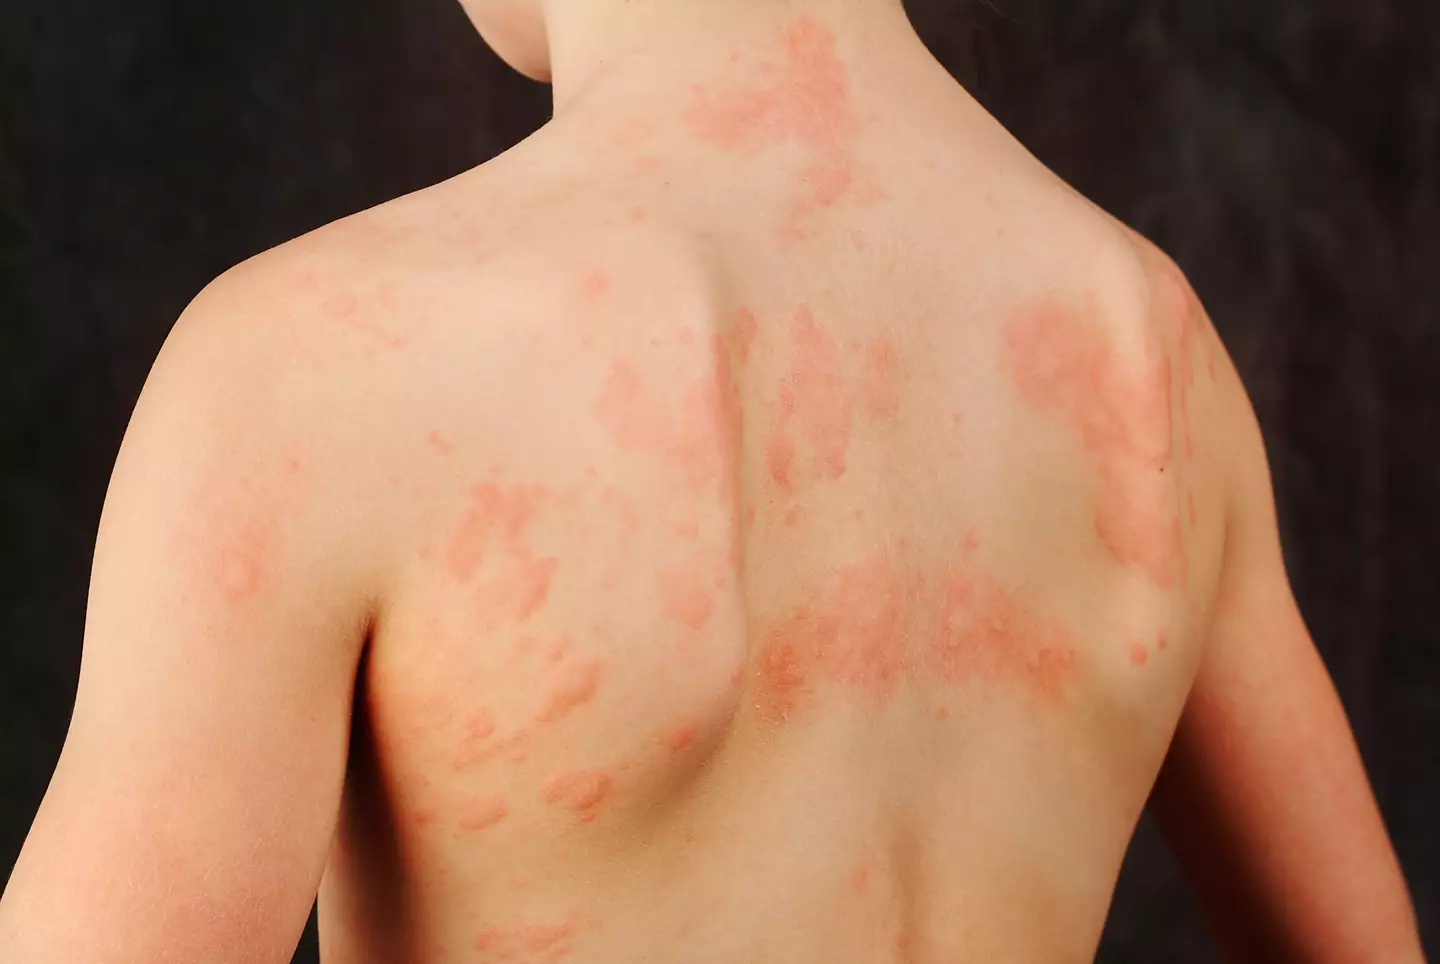 Rashes can be a tell-tale sign of Strep A.